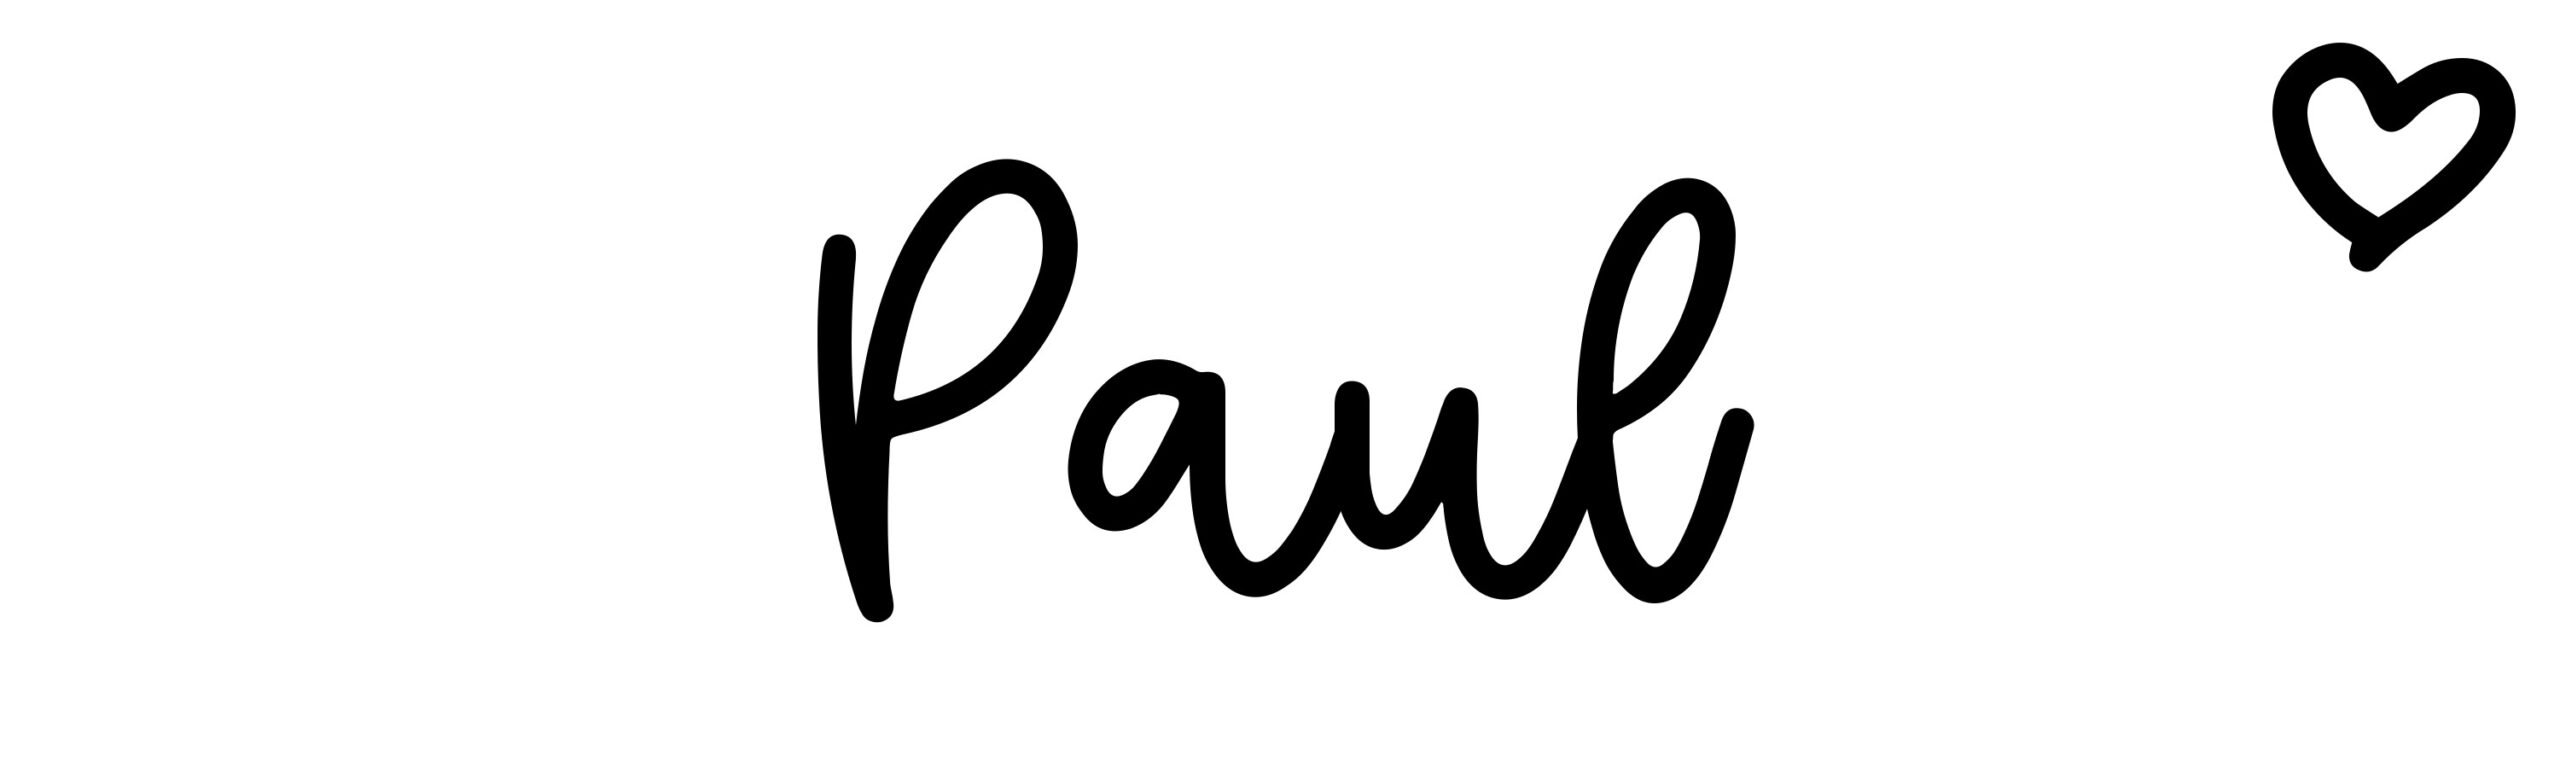 Paul - Name meaning, origin, variations and more